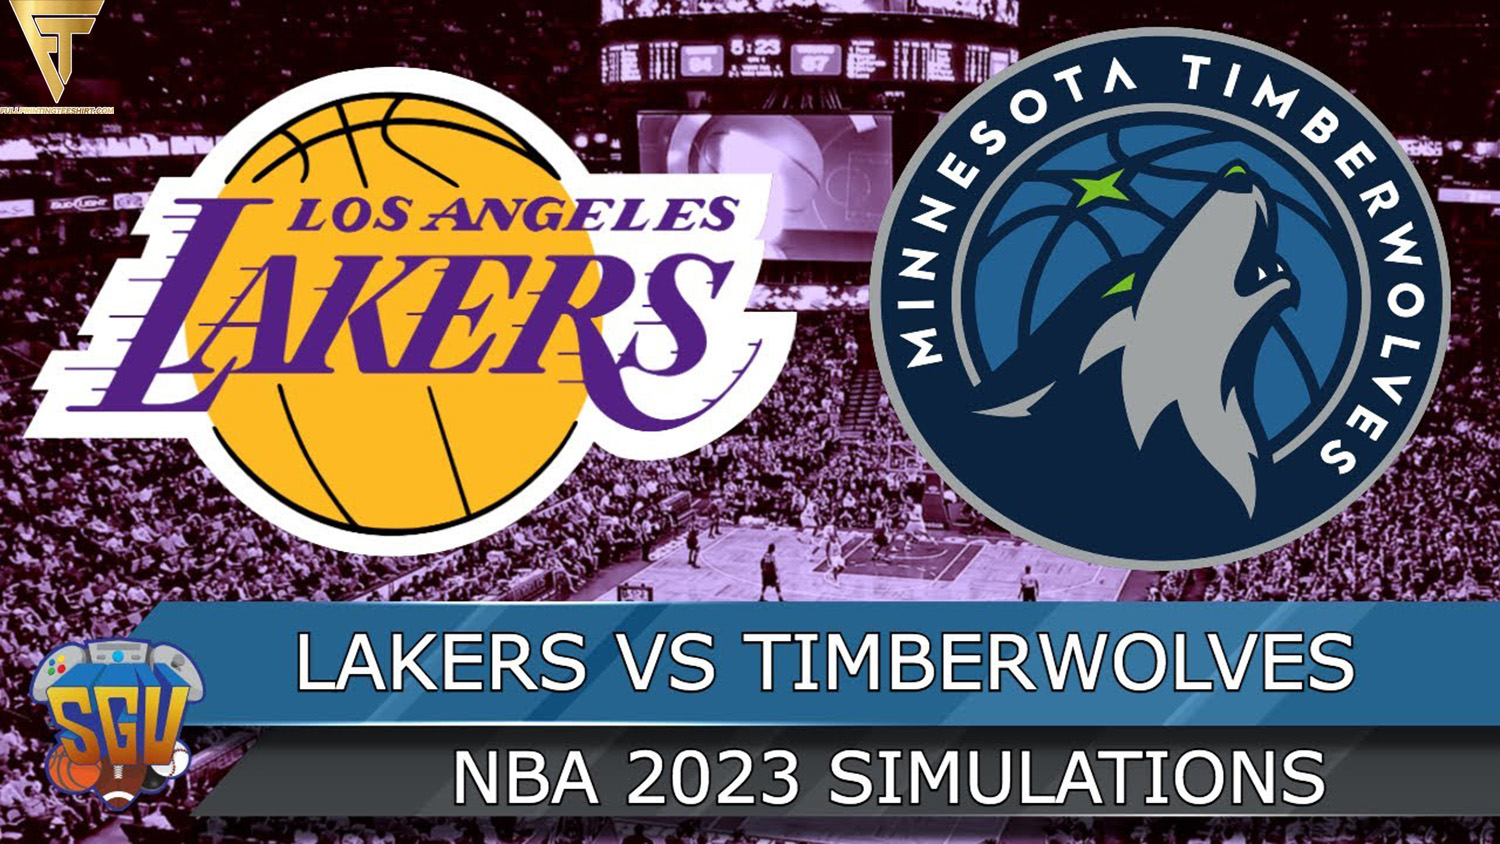 Los Angeles Lakers vs. Minnesota Timberwolves - December 30th, 2023 Face-Off at the Target Center